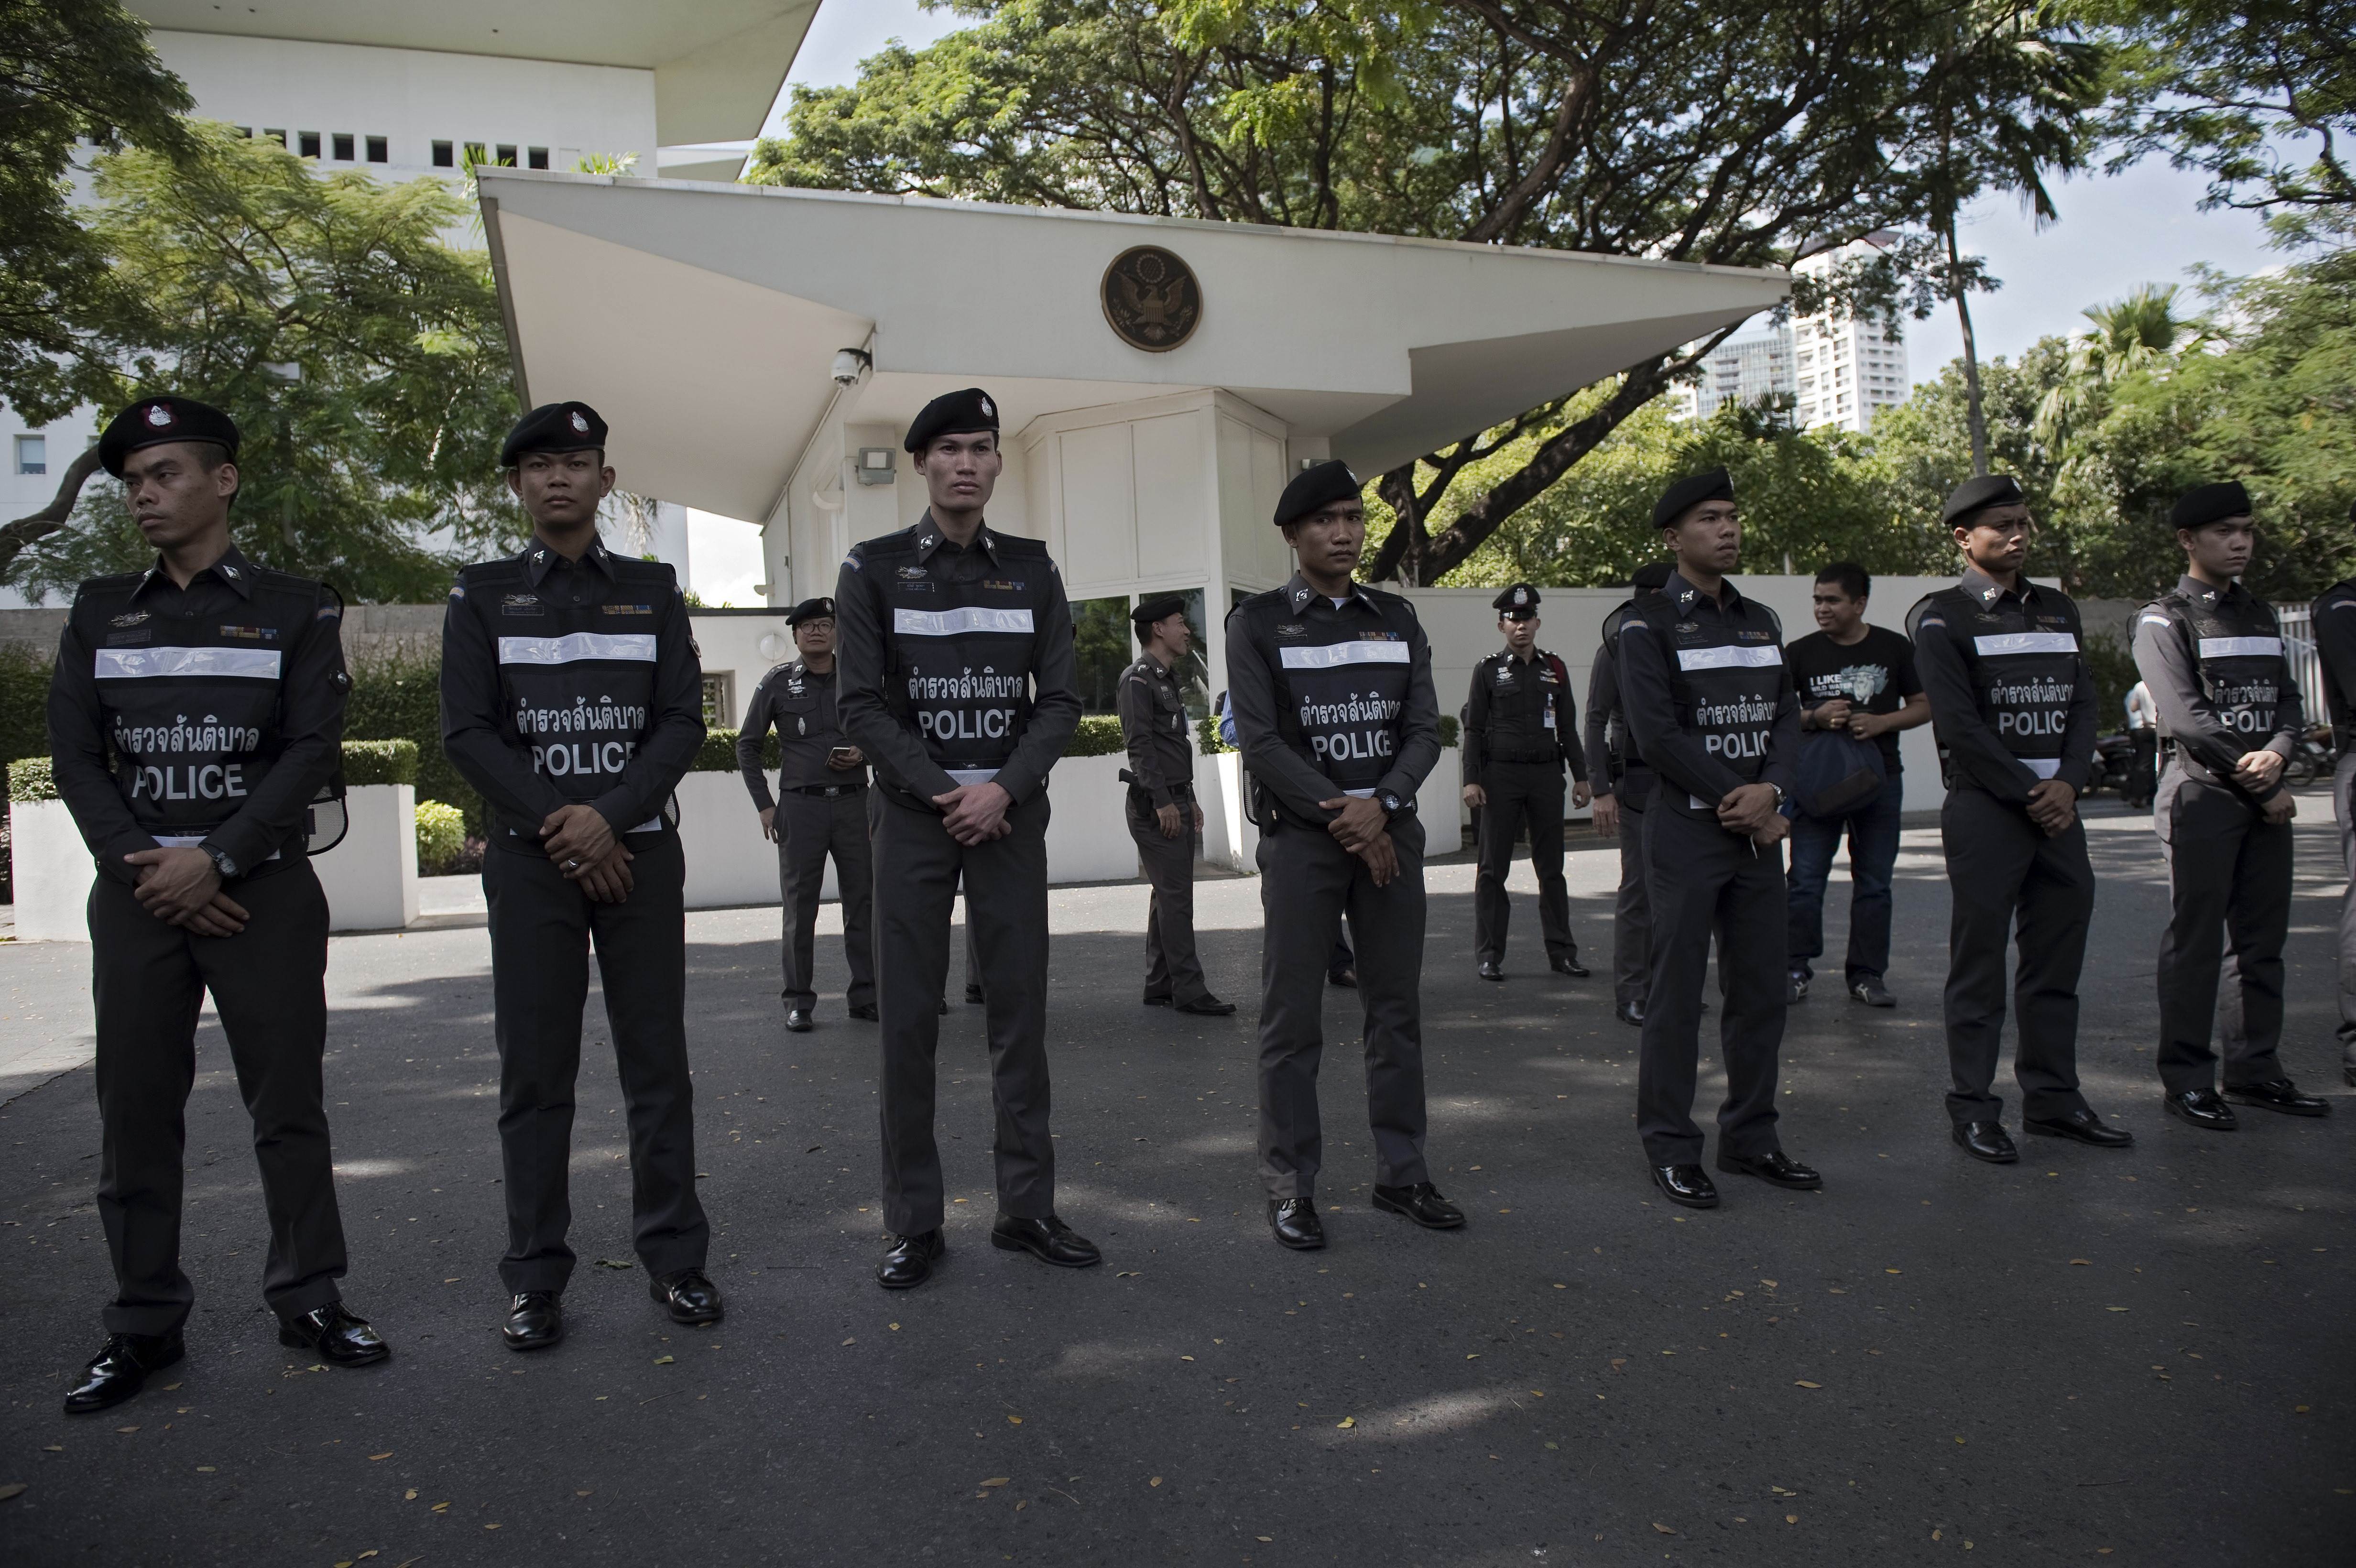 Police officers secure the front entrance of the US embassy as supporters of Thai nationalist monk Buddha Issara (not seen) hold a protest in Bangkok on November 27, 2015. An arch-royalist Thai monk led a protest against the United States envoy to Thailand after he criticised the jailing of civilians under the kingdom's tough royal defamation law. AFP PHOTO / Nicolas ASFOURI